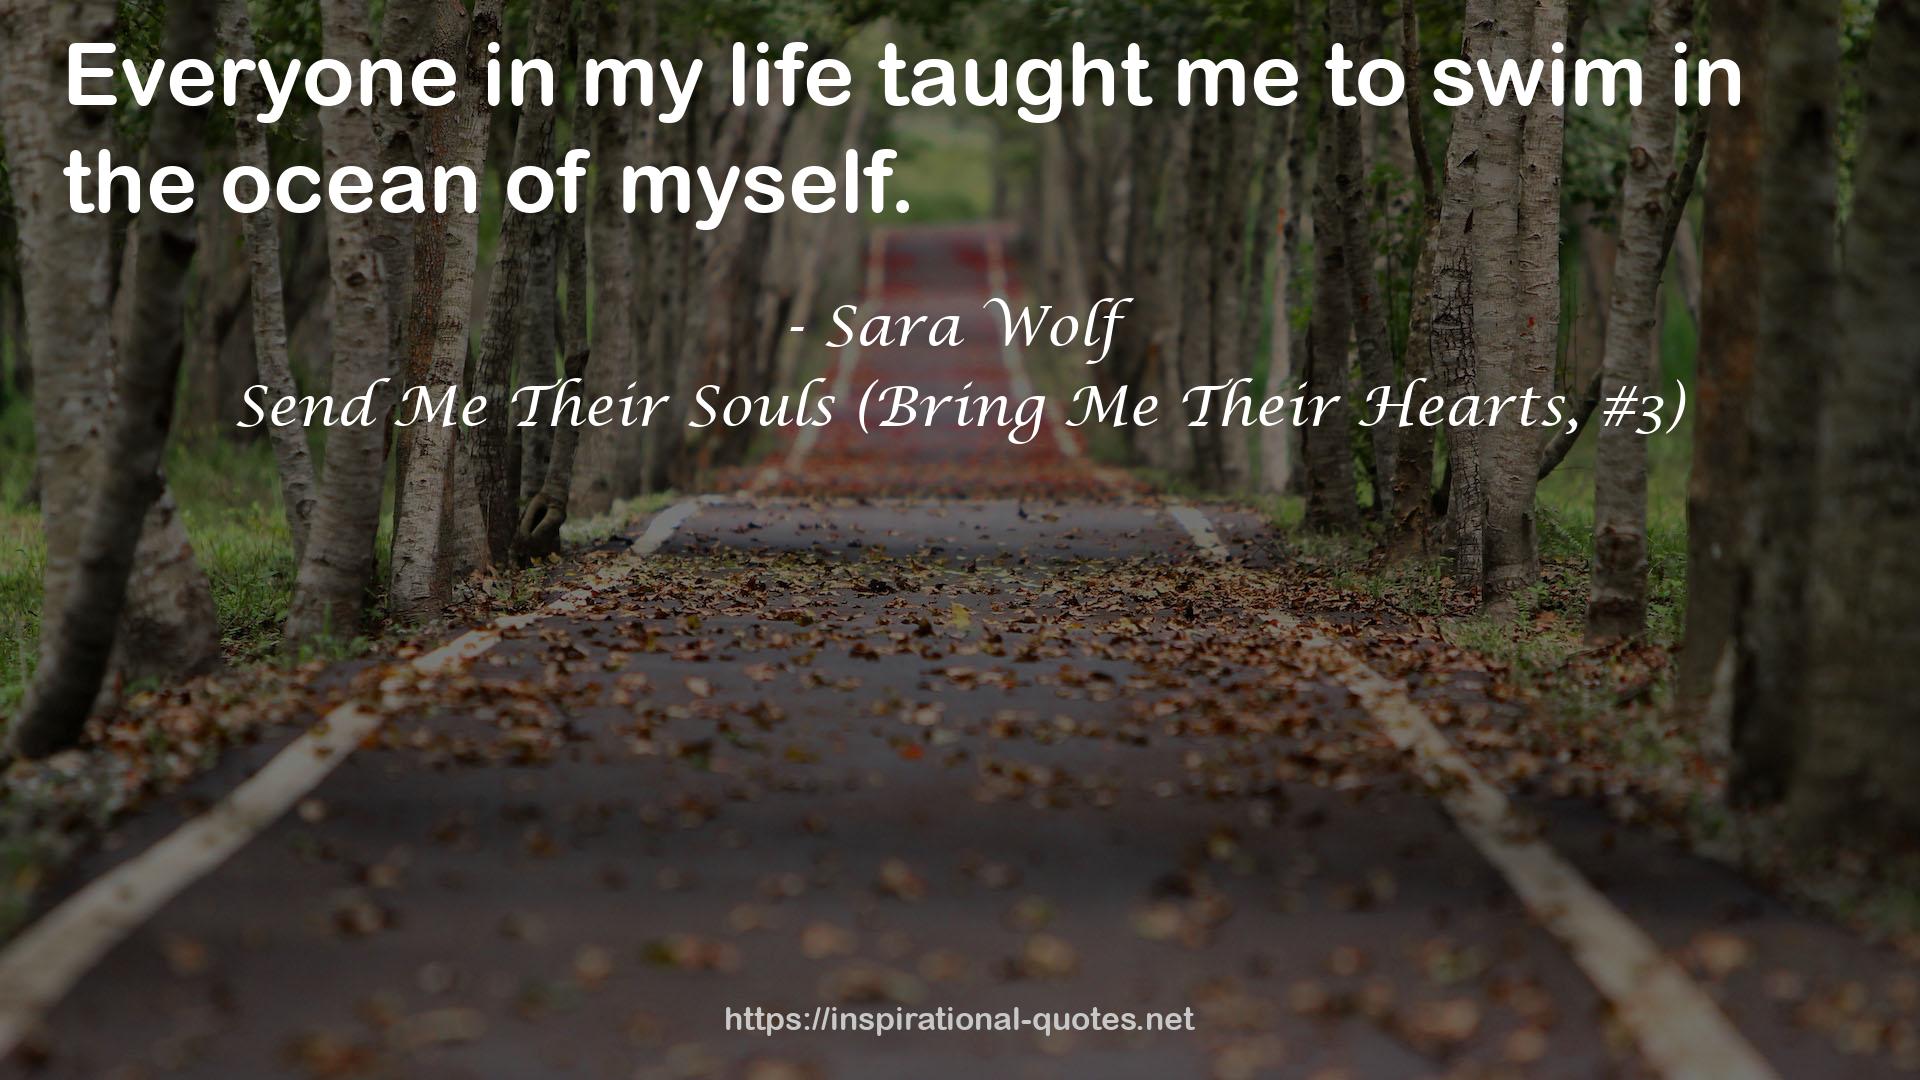 Send Me Their Souls (Bring Me Their Hearts, #3) QUOTES